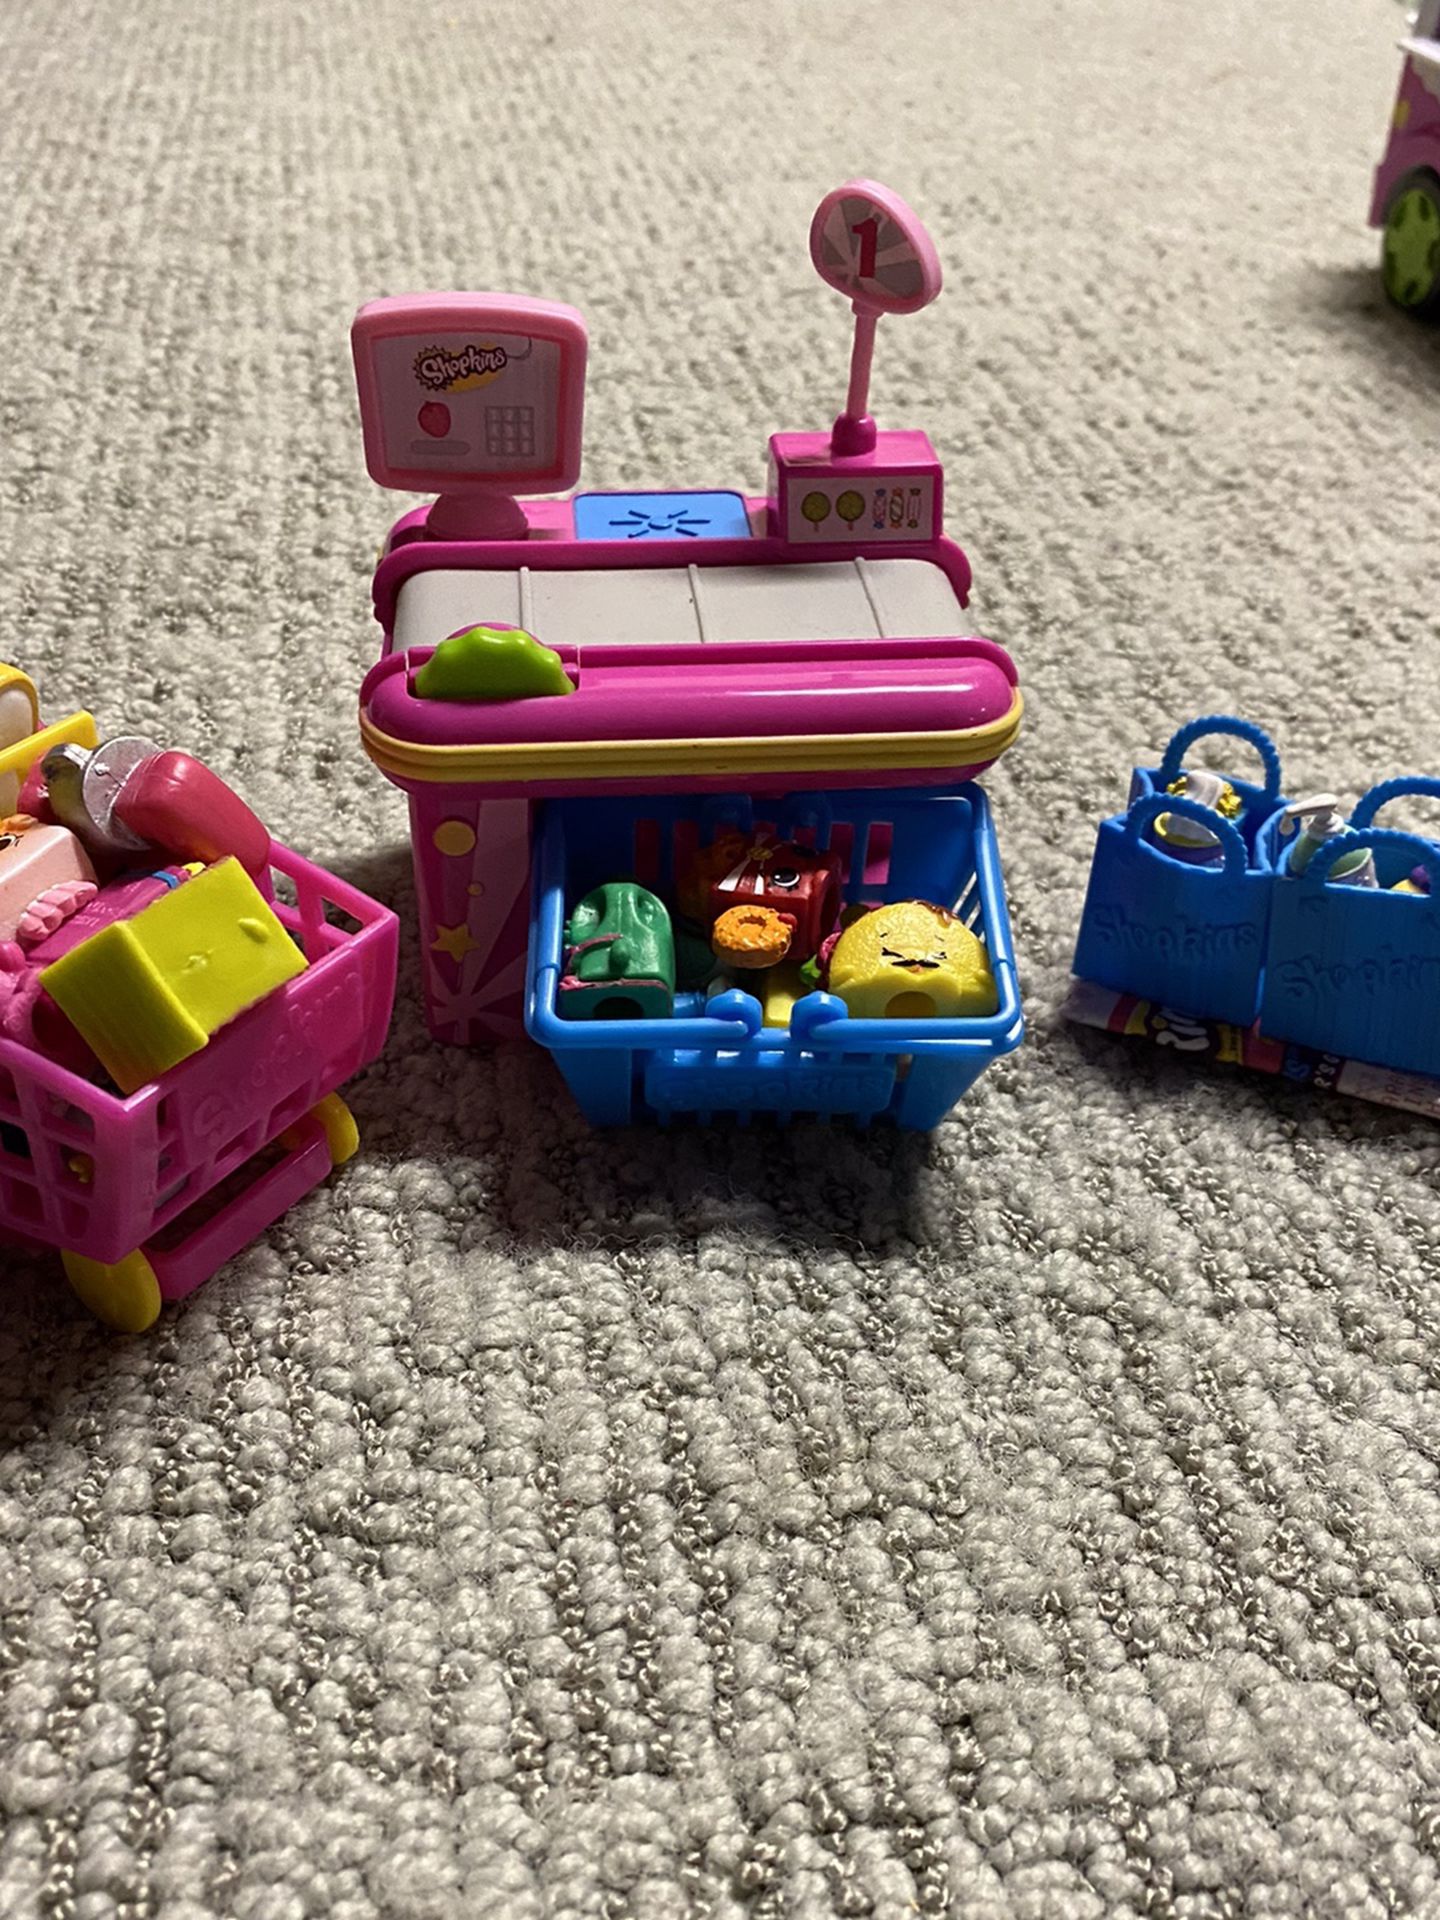 Shopkins Cash Register Collection (shopping cart included)